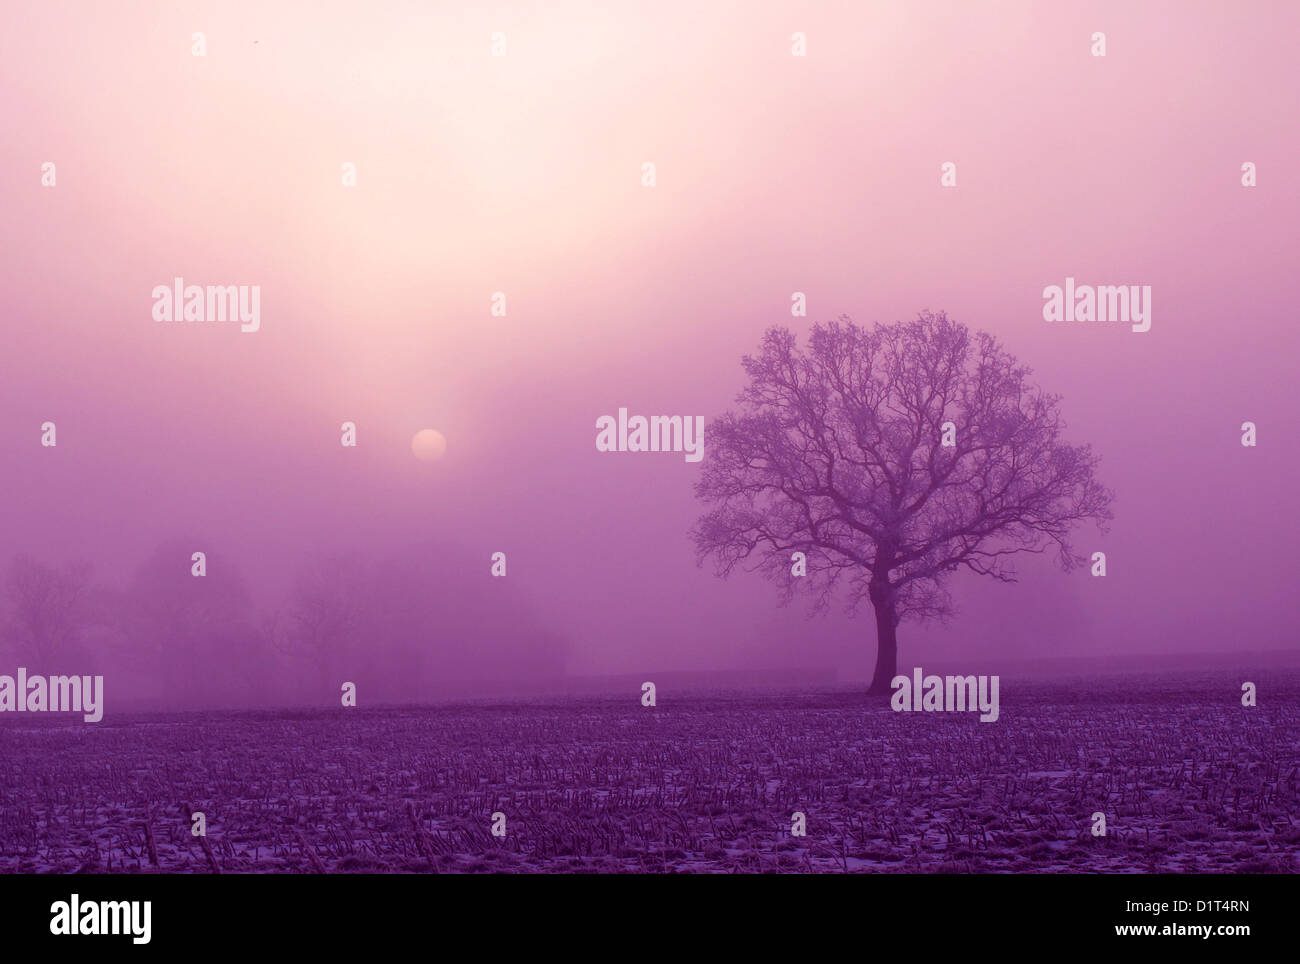 A misty lilac - purple sunrise / sunset with a tree in the